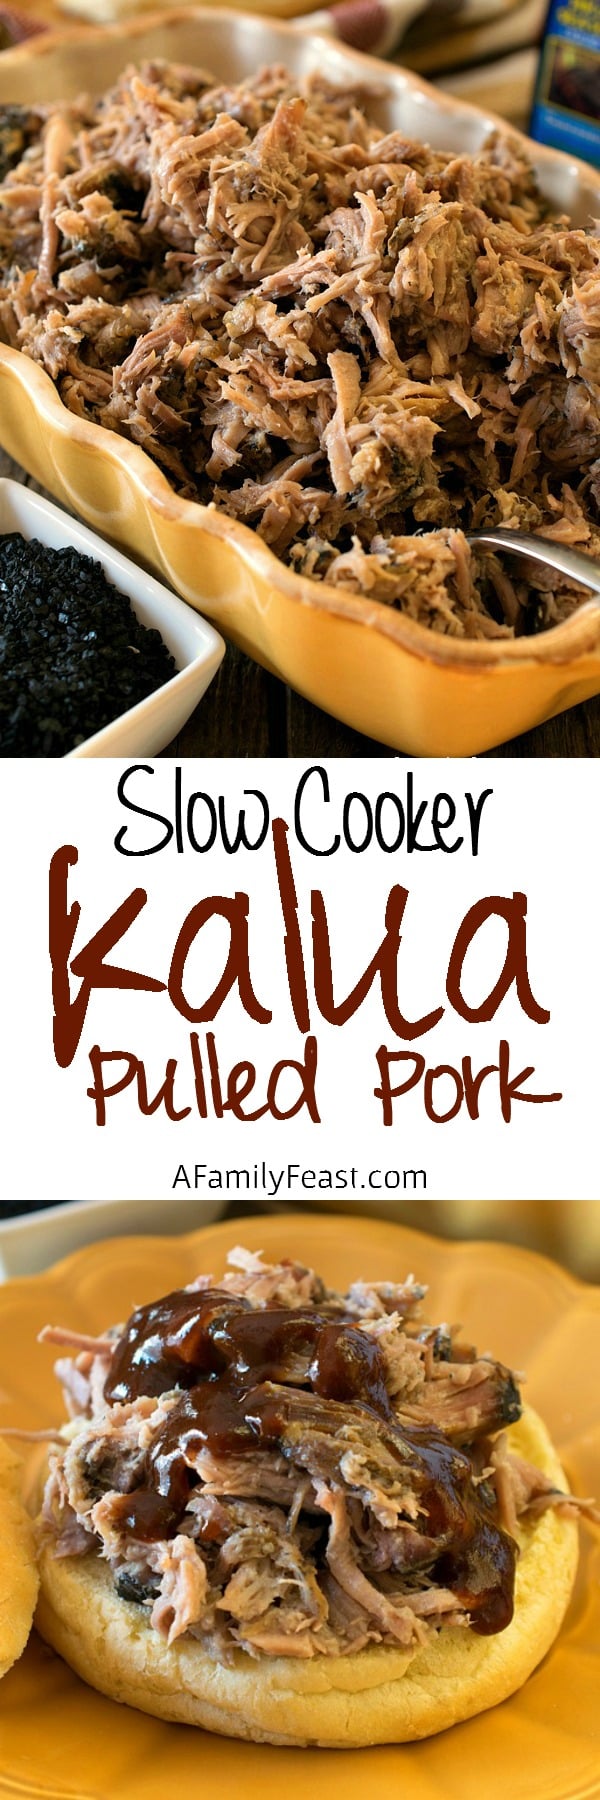 Slow Cooker Kalua Pulled Pork - So simple to make, super delicious and versatile. Use this cooked pork in many recipes.